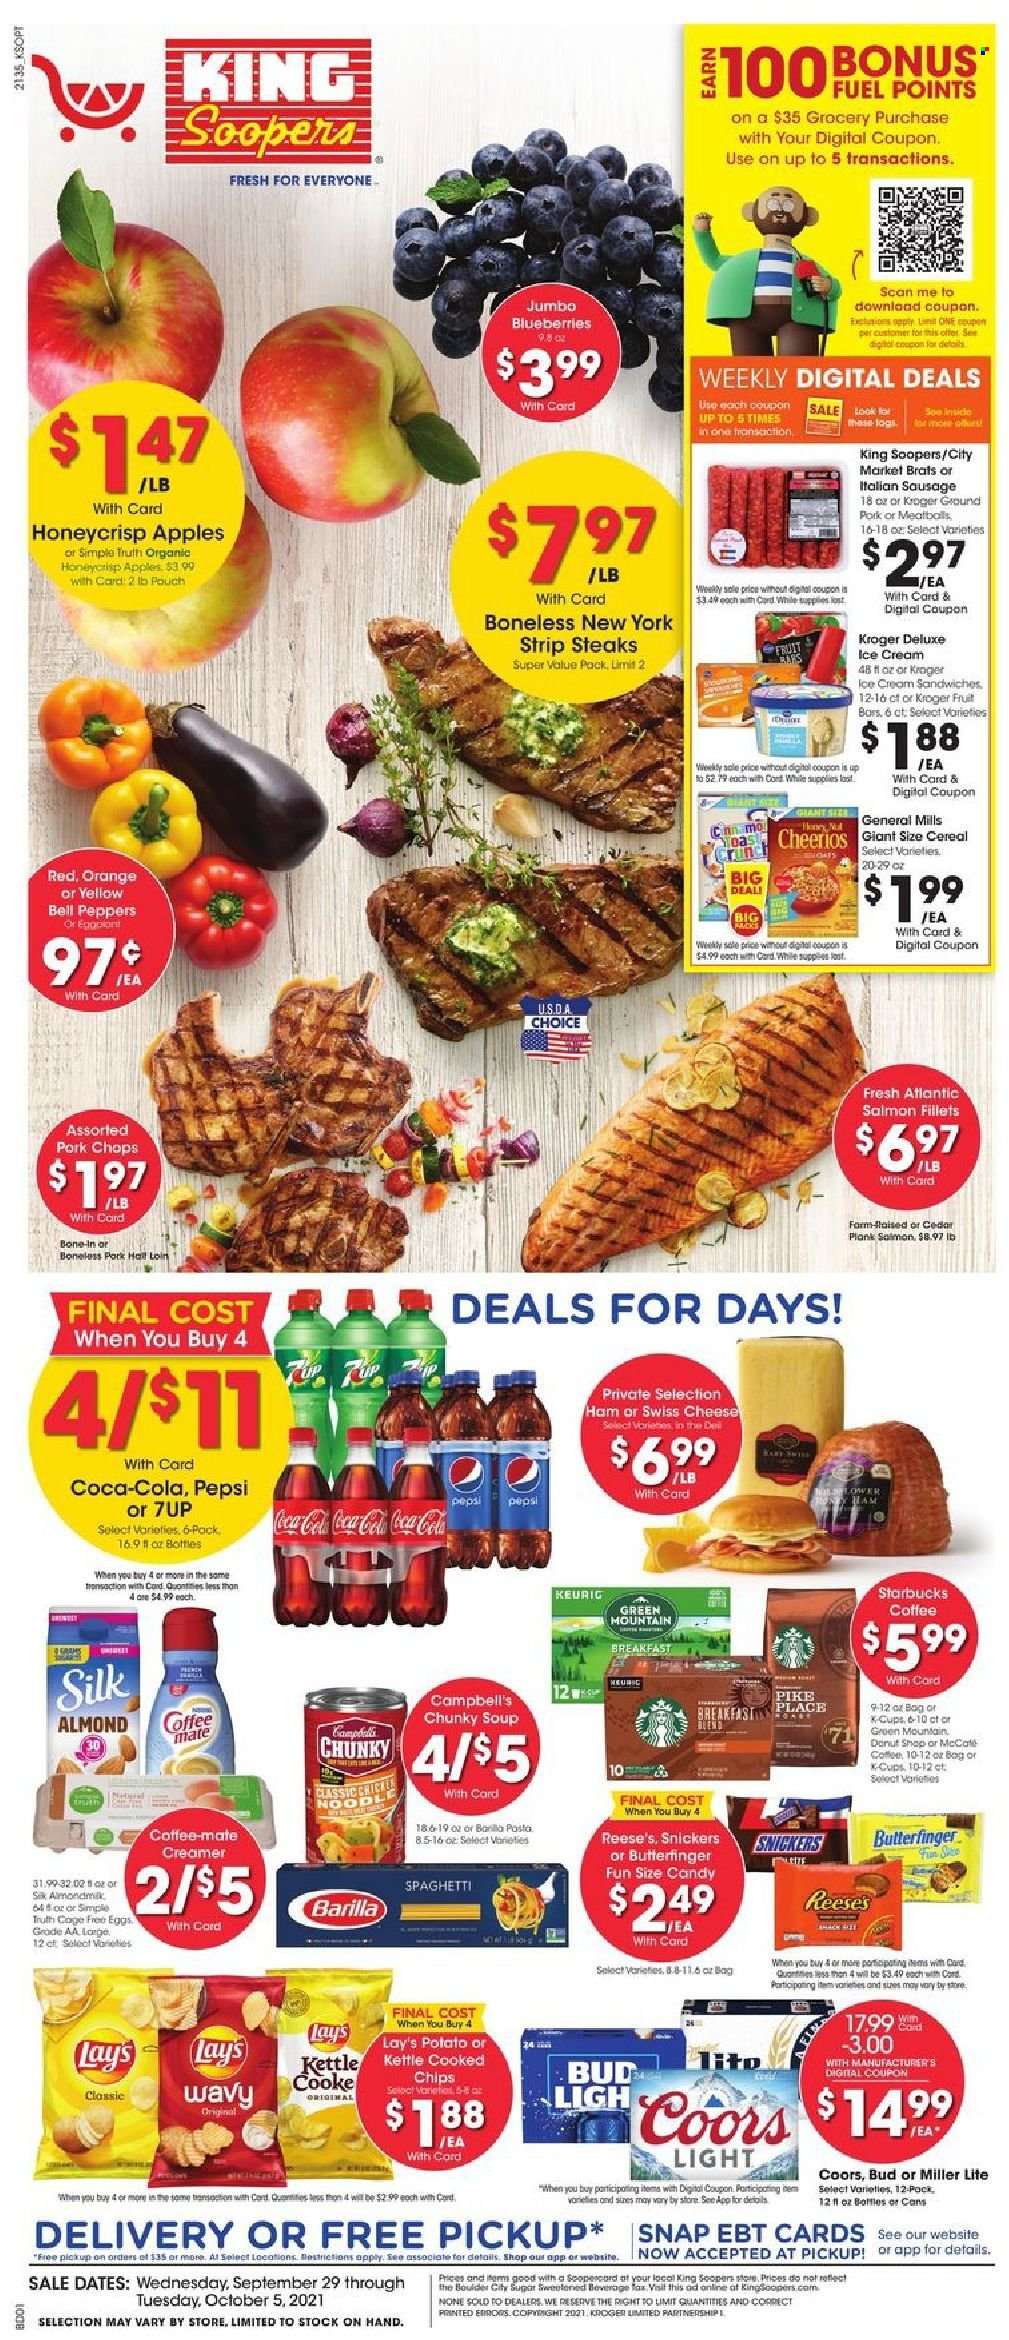 thumbnail - King Soopers Flyer - 09/29/2021 - 10/05/2021 - Sales products - bell peppers, peppers, apples, blueberries, oranges, salmon, salmon fillet, Campbell's, spaghetti, soup, Barilla, ham, sausage, italian sausage, swiss cheese, cheese, Coffee-Mate, Silk, eggs, creamer, ice cream, Reese's, Snickers, chips, Lay’s, kettle, sugar, cereals, Cheerios, Coca-Cola, Pepsi, 7UP, Starbucks, coffee capsules, K-Cups, Keurig, beer, beef meat, steak, striploin steak, ground pork, pork chops, pork meat, Miller Lite, Coors. Page 1.